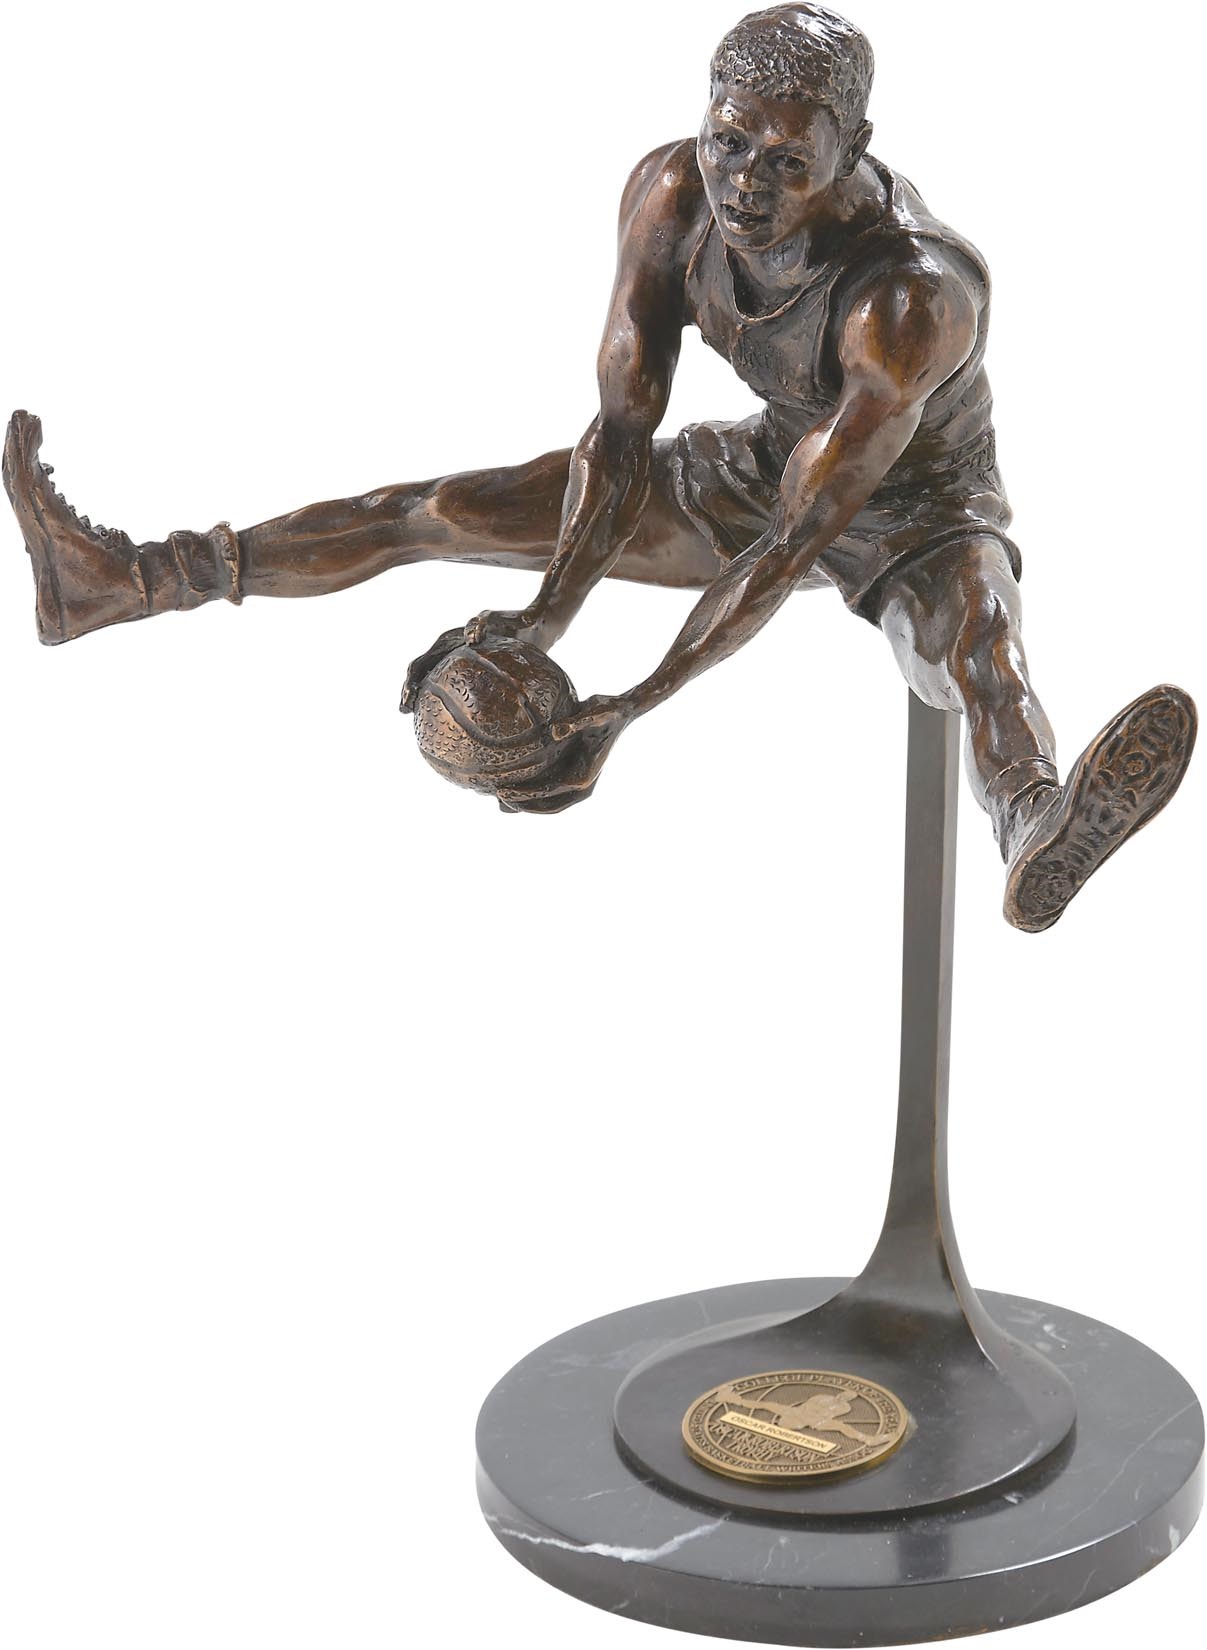 The Oscar Robertson Collection - Oscar Robertson College Player of the Year Trophy Presented to Oscar Robertson